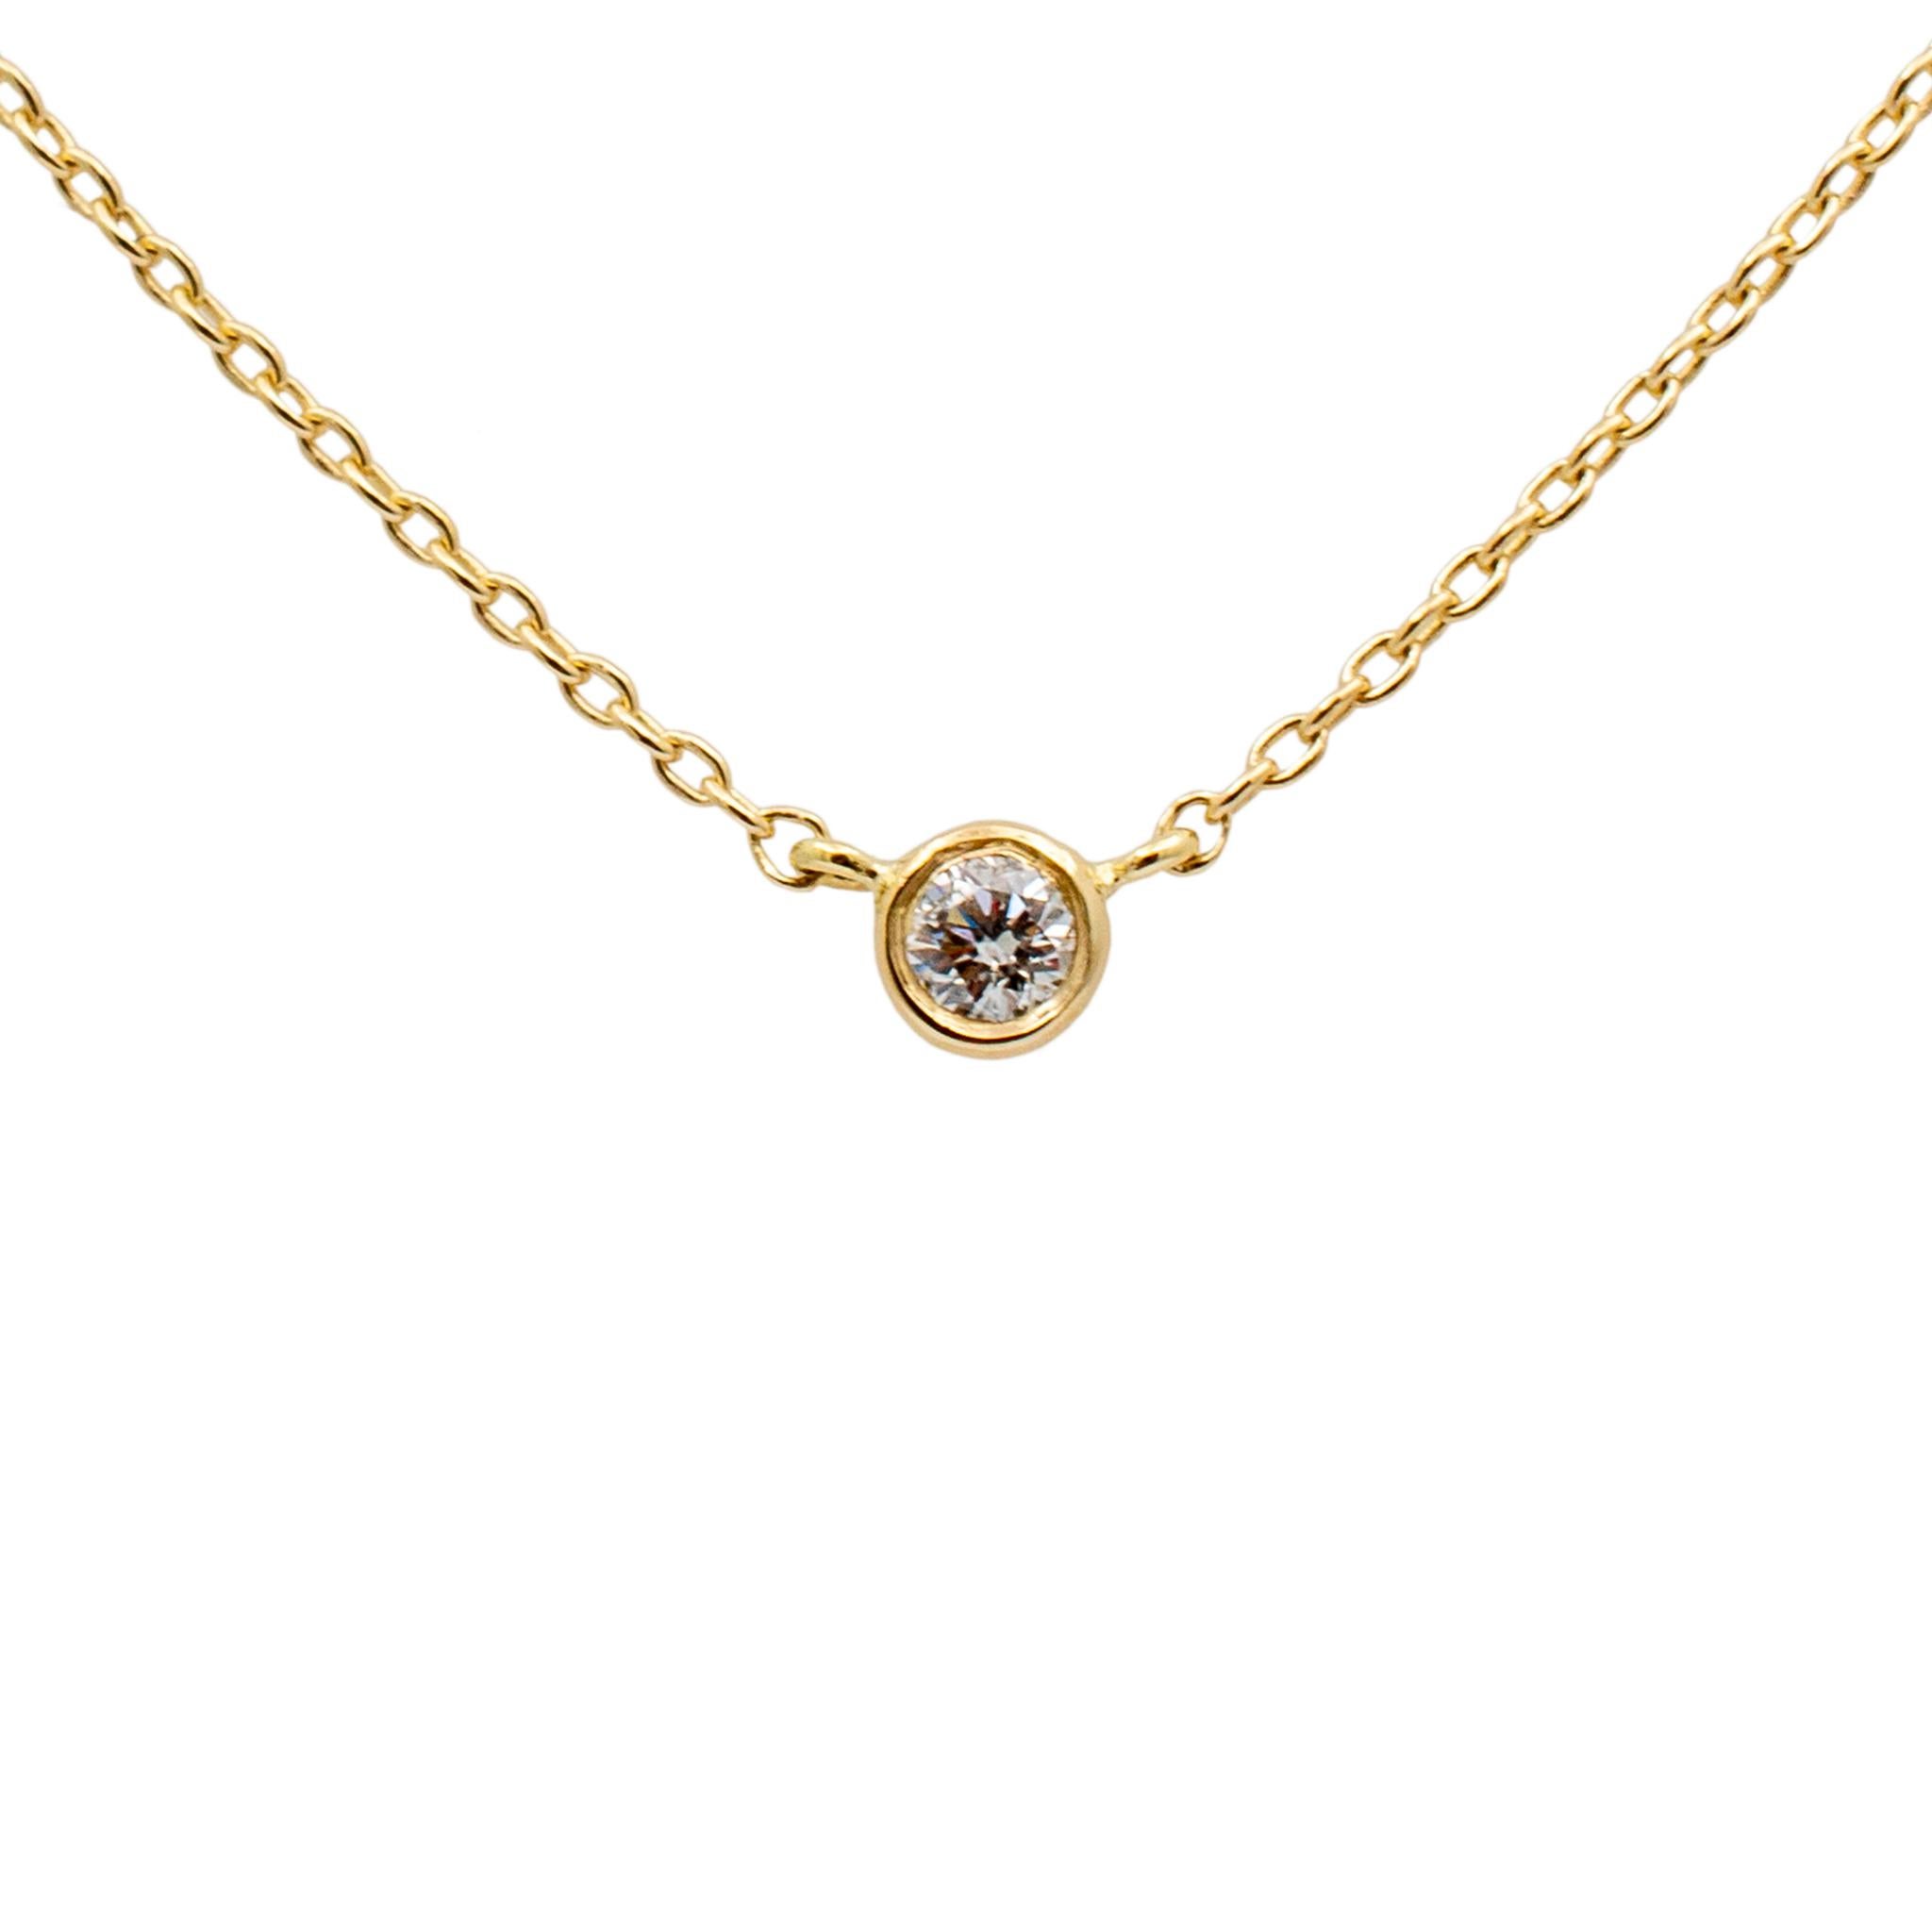 Gender: Ladies

Metal Type: 14K Yellow Gold

Length: 15.00 Inches

Width: 0.60 mm

Diameter: 3.20 mm

Weight: 1.20 grams

14K yellow gold single strand collar diamond necklace. Engraved with 